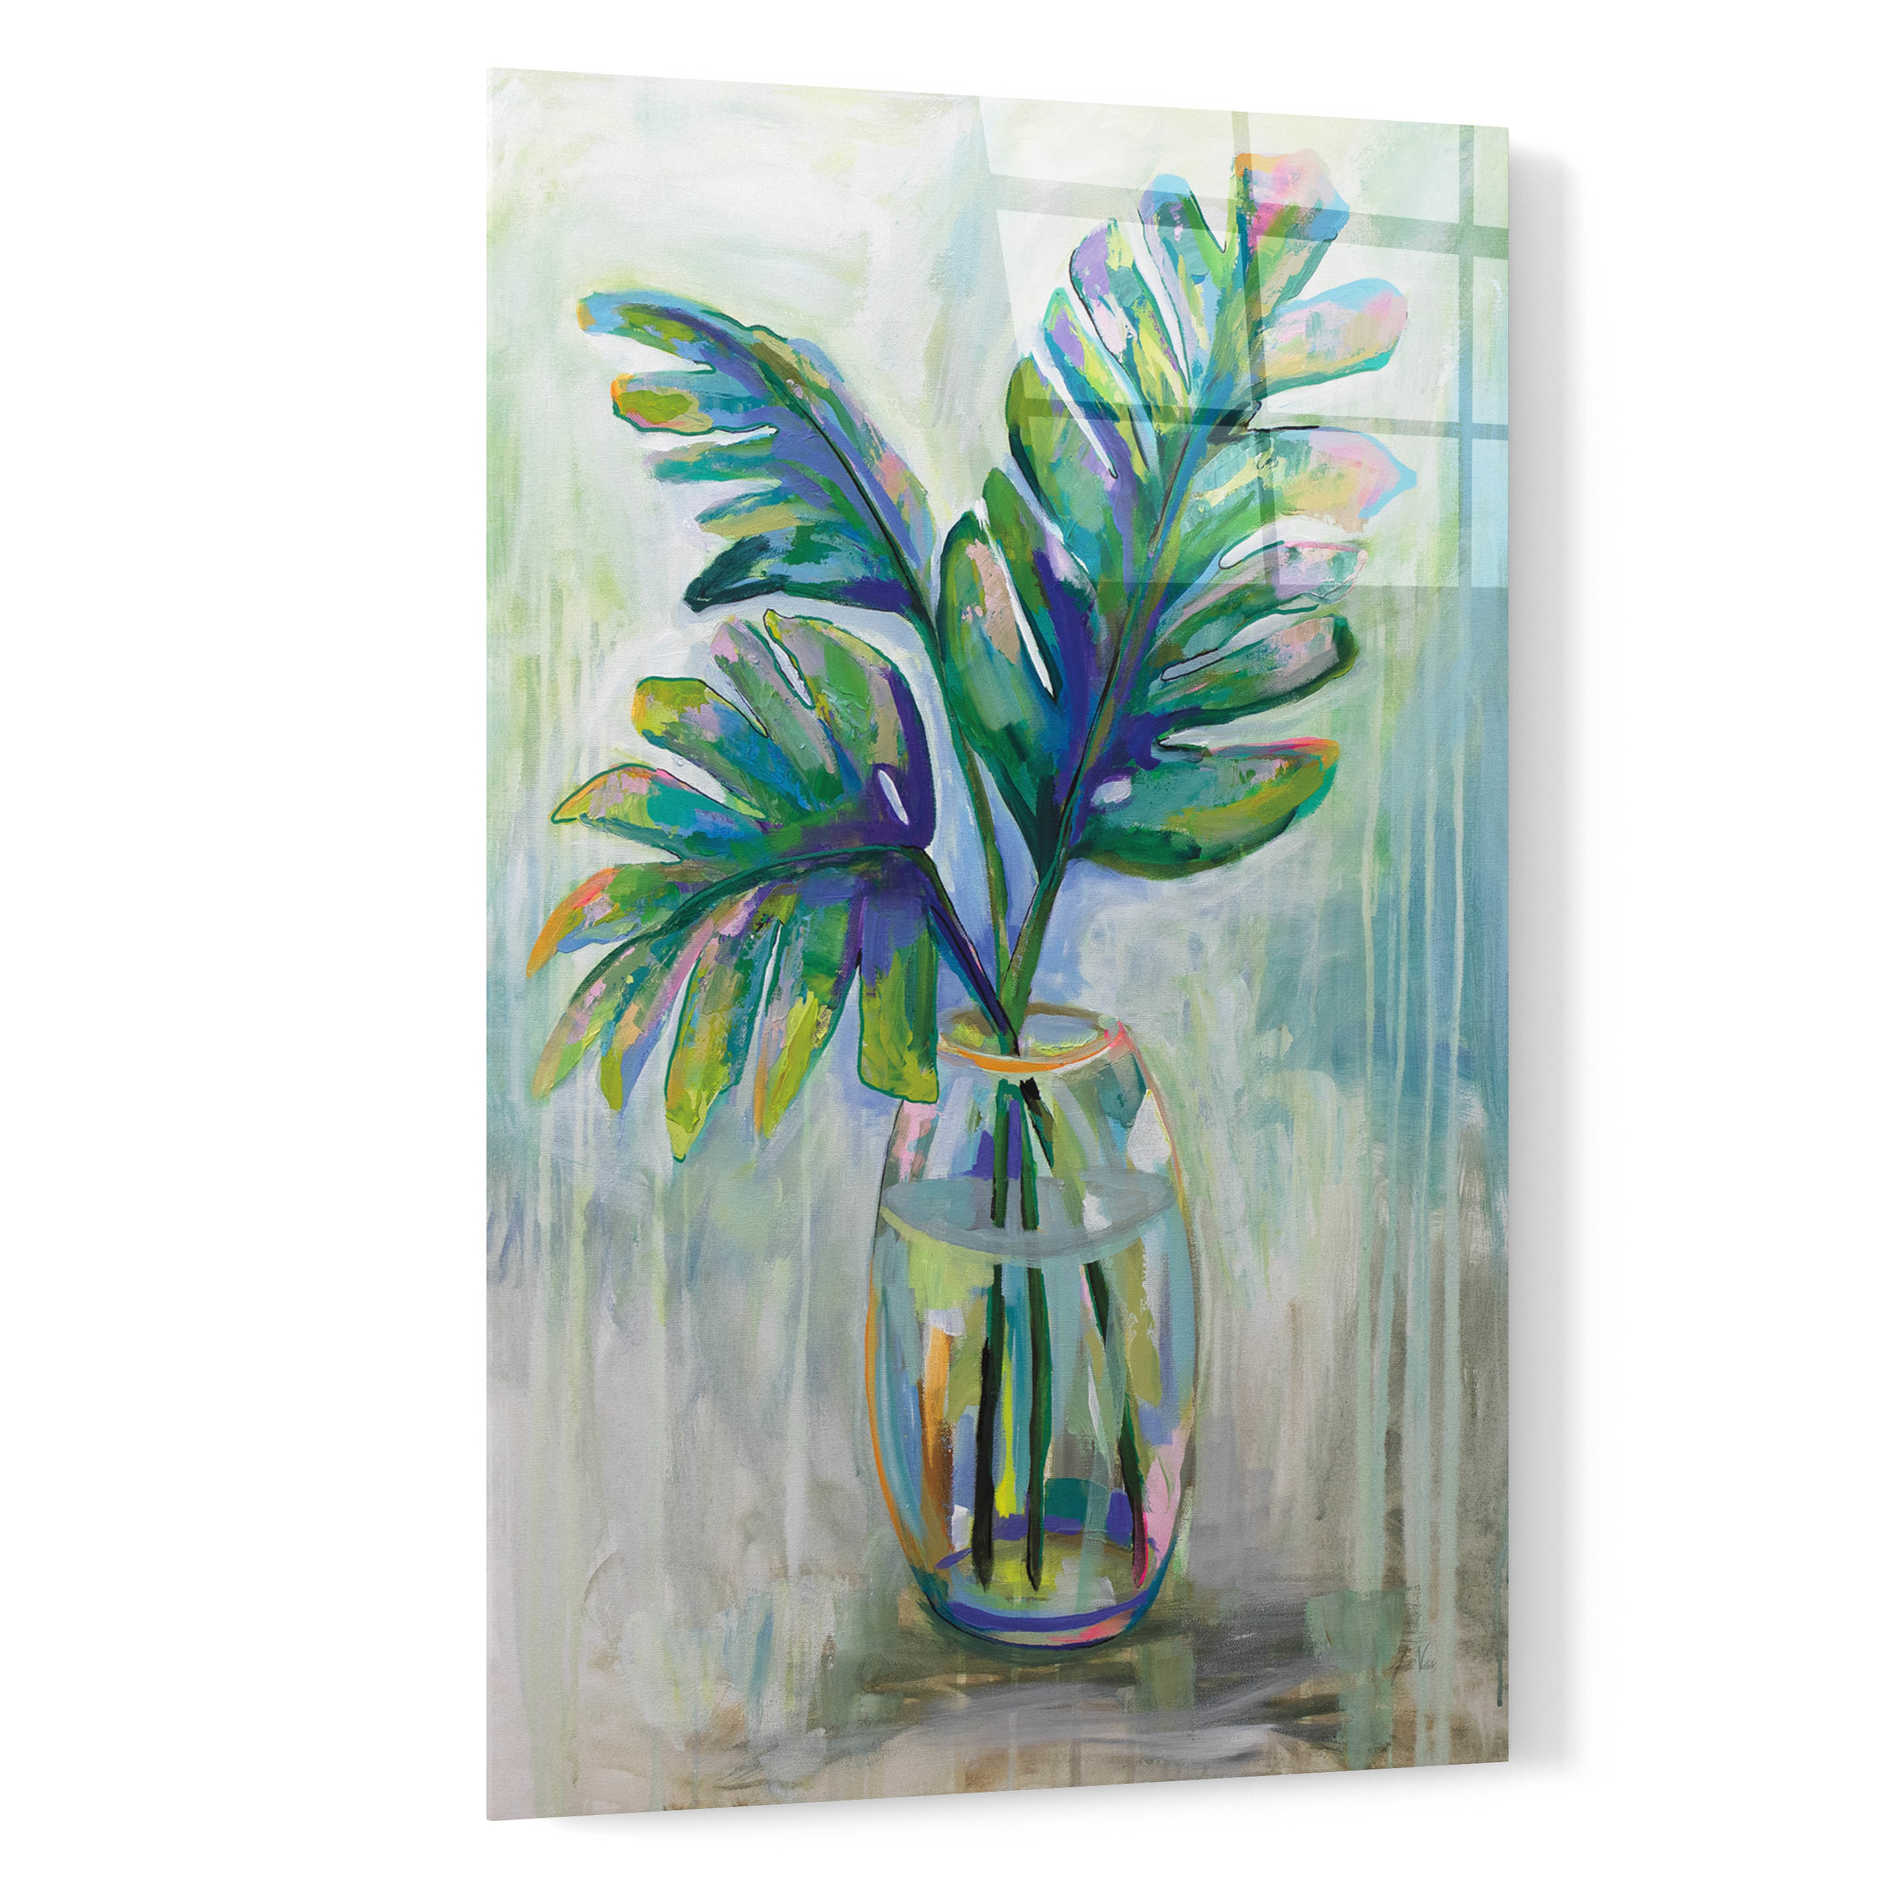 Epic Art 'Palm Leaves II' by Jeanette Vertentes, Acrylic Glass Wall Art,16x24